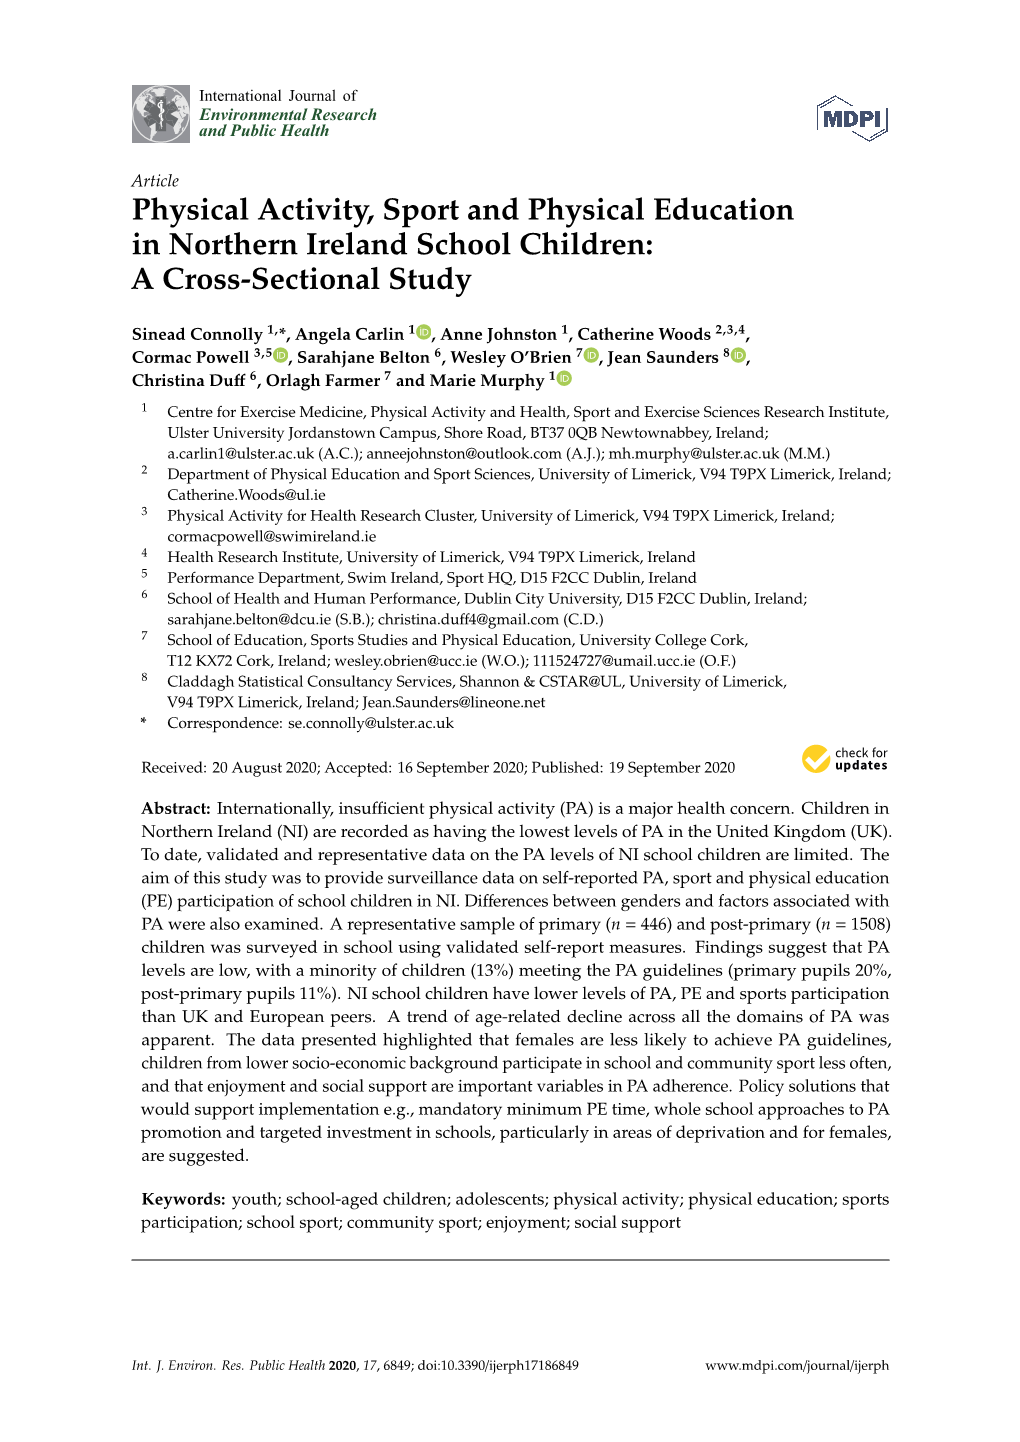 Physical Activity, Sport and Physical Education in Northern Ireland School Children: a Cross-Sectional Study